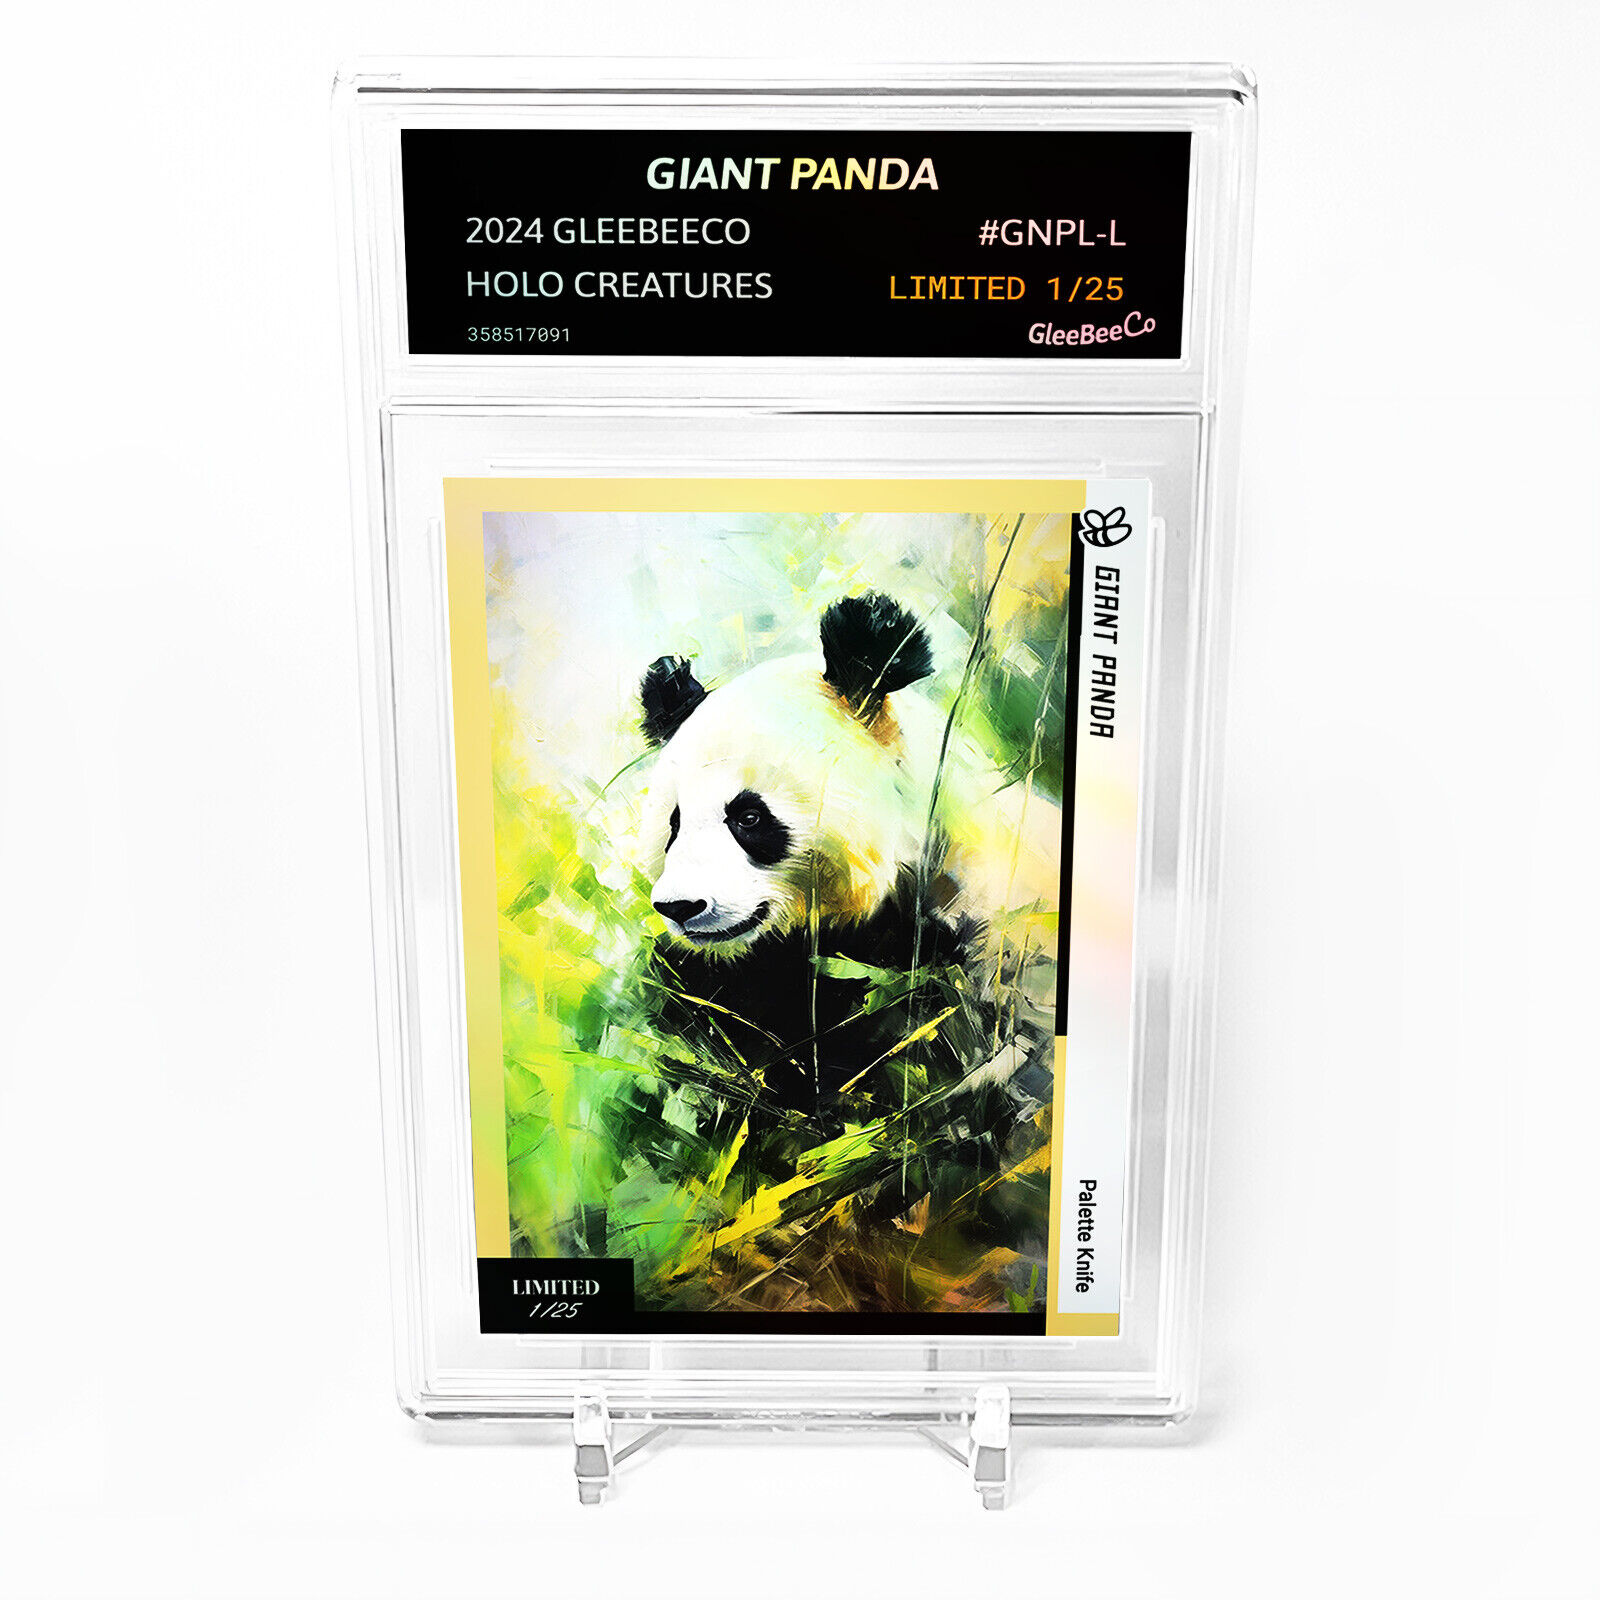 GIANT PANDA Holographic Card 2024 GleeBeeCo Slabbed #GNPL-L Only /25